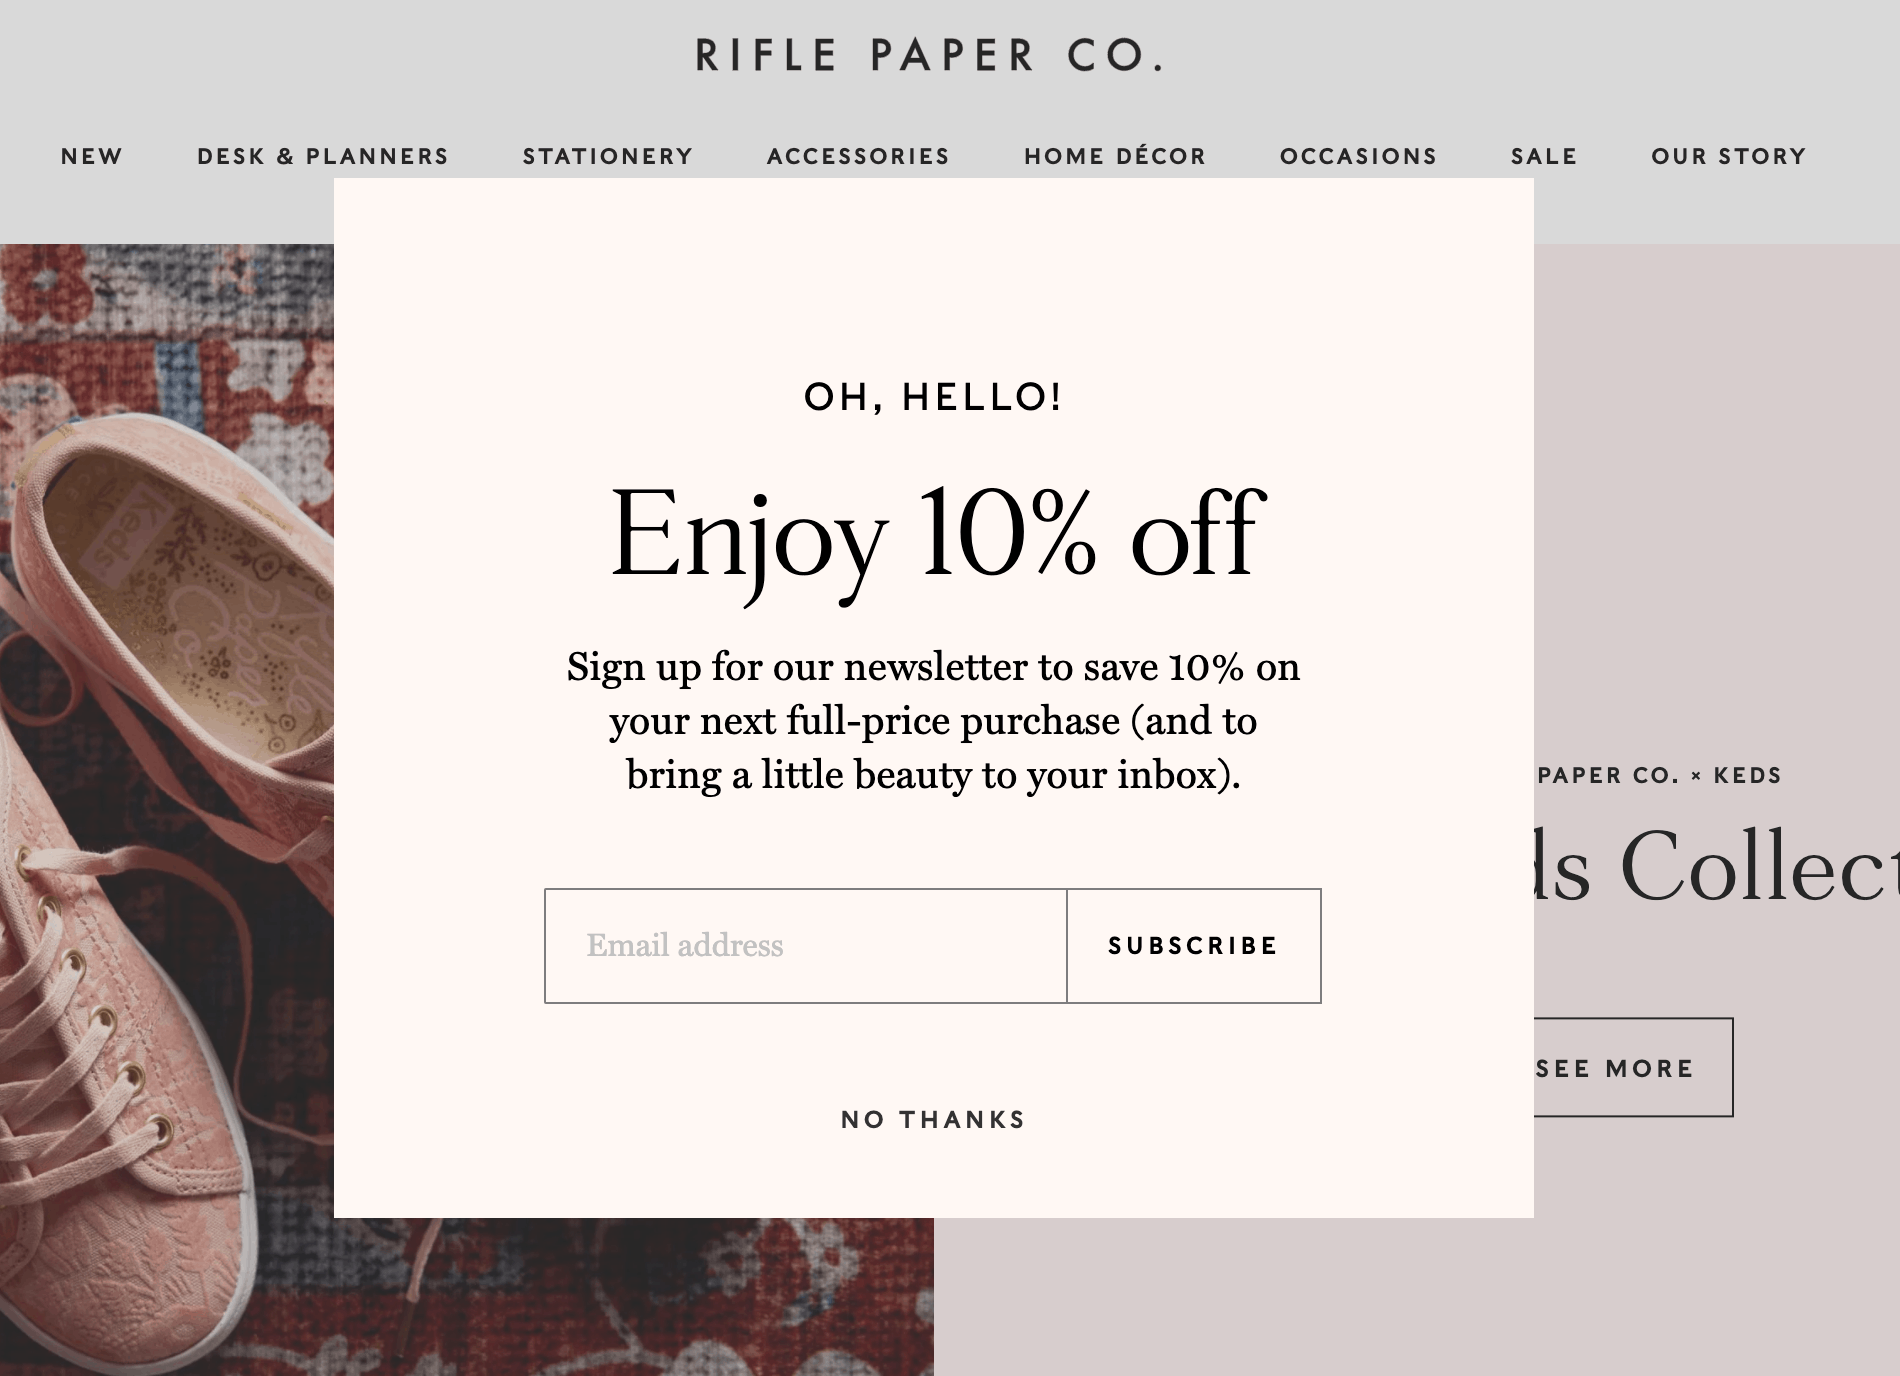 Rifle Paper Co has a super neat lead magnet. They offer a discount code that you can use immediately if you sign up to their newsletter! 